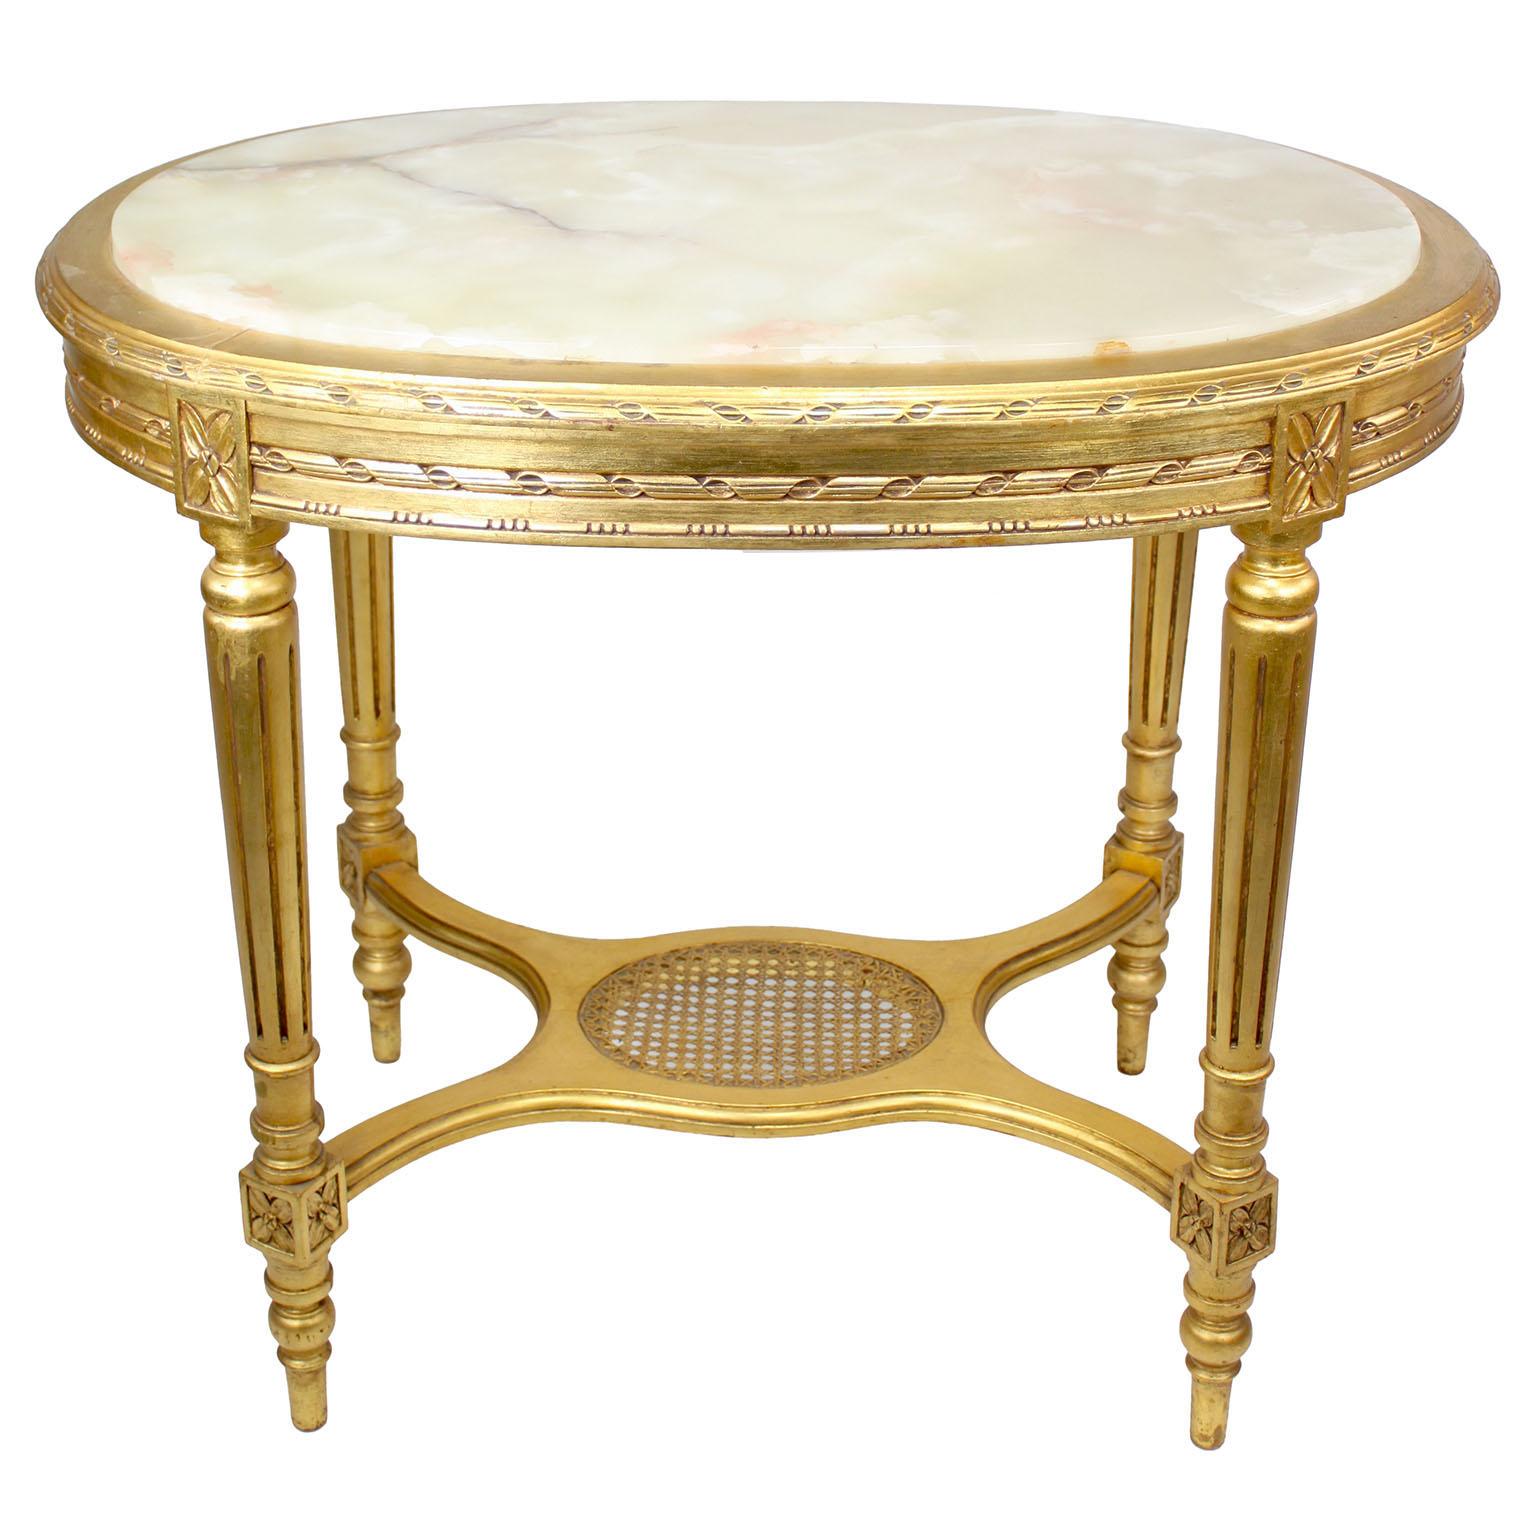 A French Louis XVI Style 'Belle Époque' Oval Giltwood Carved Center Table with Onyx Top. The decorated carved apron fitted with a veined light-green onyx top and raised on four fluted tapered legs conjoined with a 